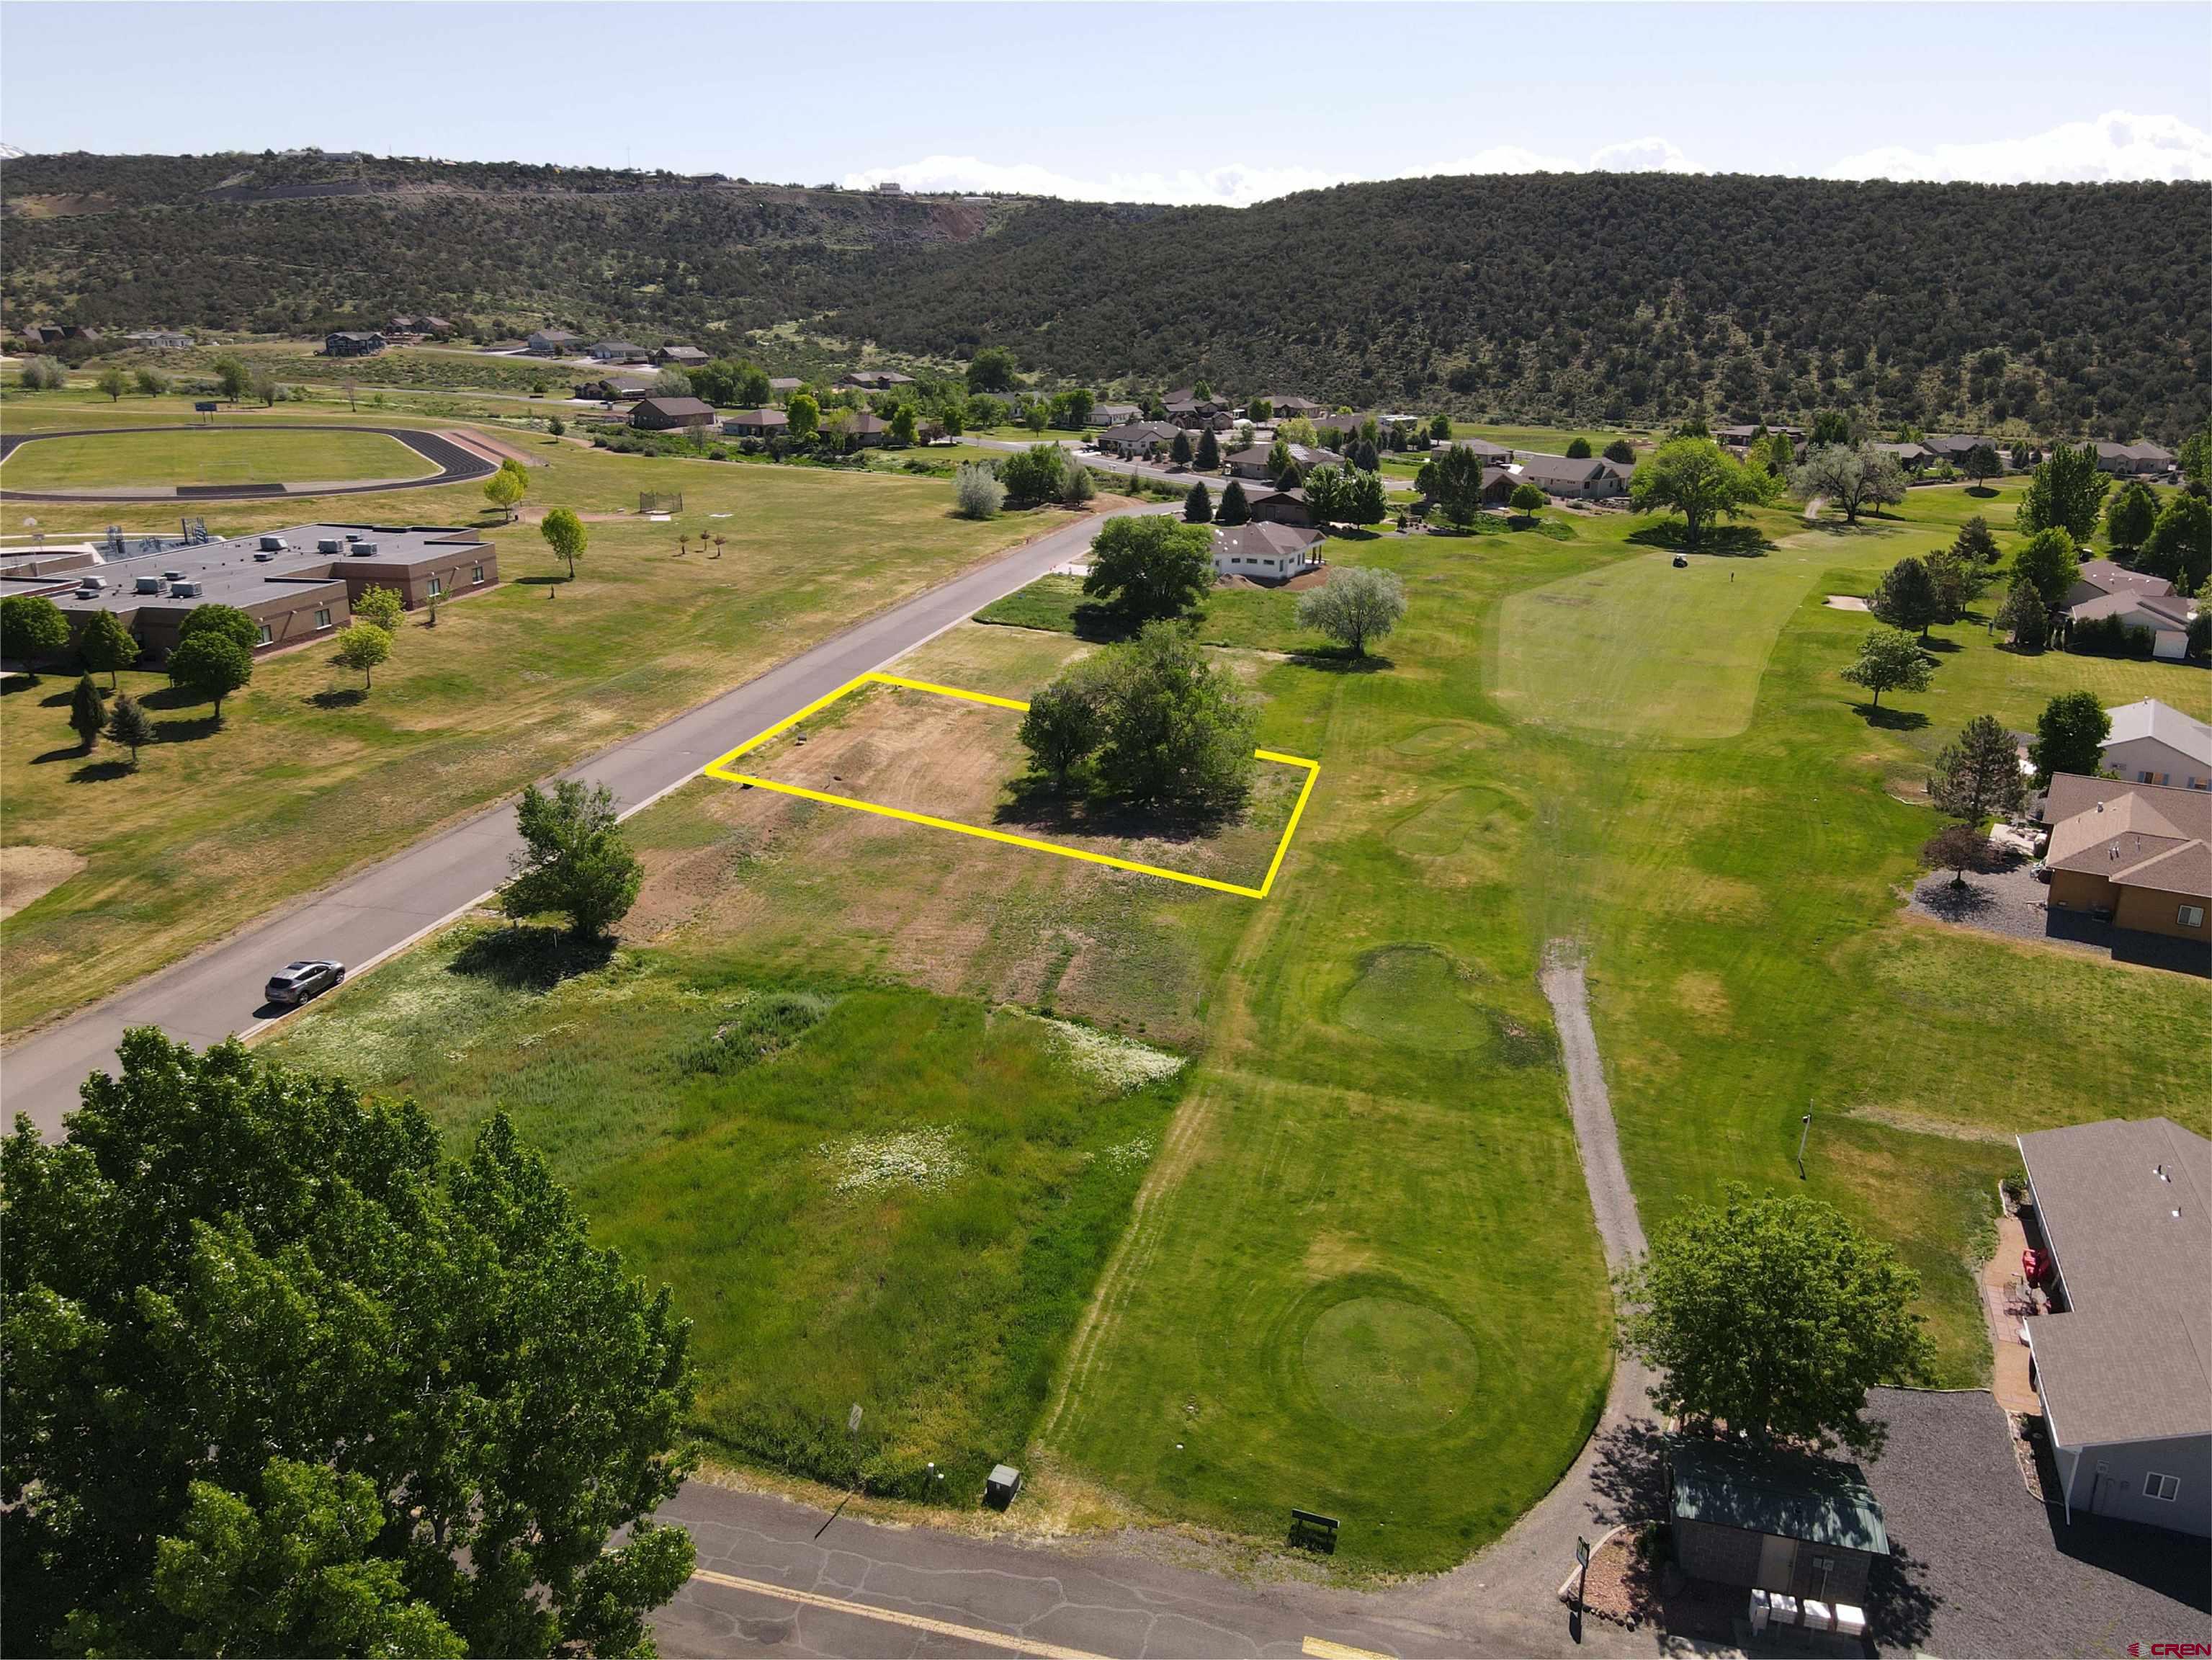 Perfect golf course lot backing up to the 5th Fairway of the Cedaredge 18-Hole Public Golf Course.  No golf membership is required to live in the golf course community.  All utilities are to the lot with water and sewer taps available to purchase through the Town of Cedaredge.  High speed, fiber optic internet also available.  Cedaredge is a very desirable community with restaurants, doctors, dentists, one grocery store, hospital within 15 miles and the Grand Mesa within a 30 minute drive.  The Grand Mesa is the largest flat top mesa in the world with over 300+ lakes.  Great fishing, hiking trails, snowmobiling, cross-country skiing, snowshoeing, camping and much more!  This lot has great views of the Grand Mesa and within walking distance to Cedaredge Middle and High Schools.  RV/Boat storage available through the HOA.